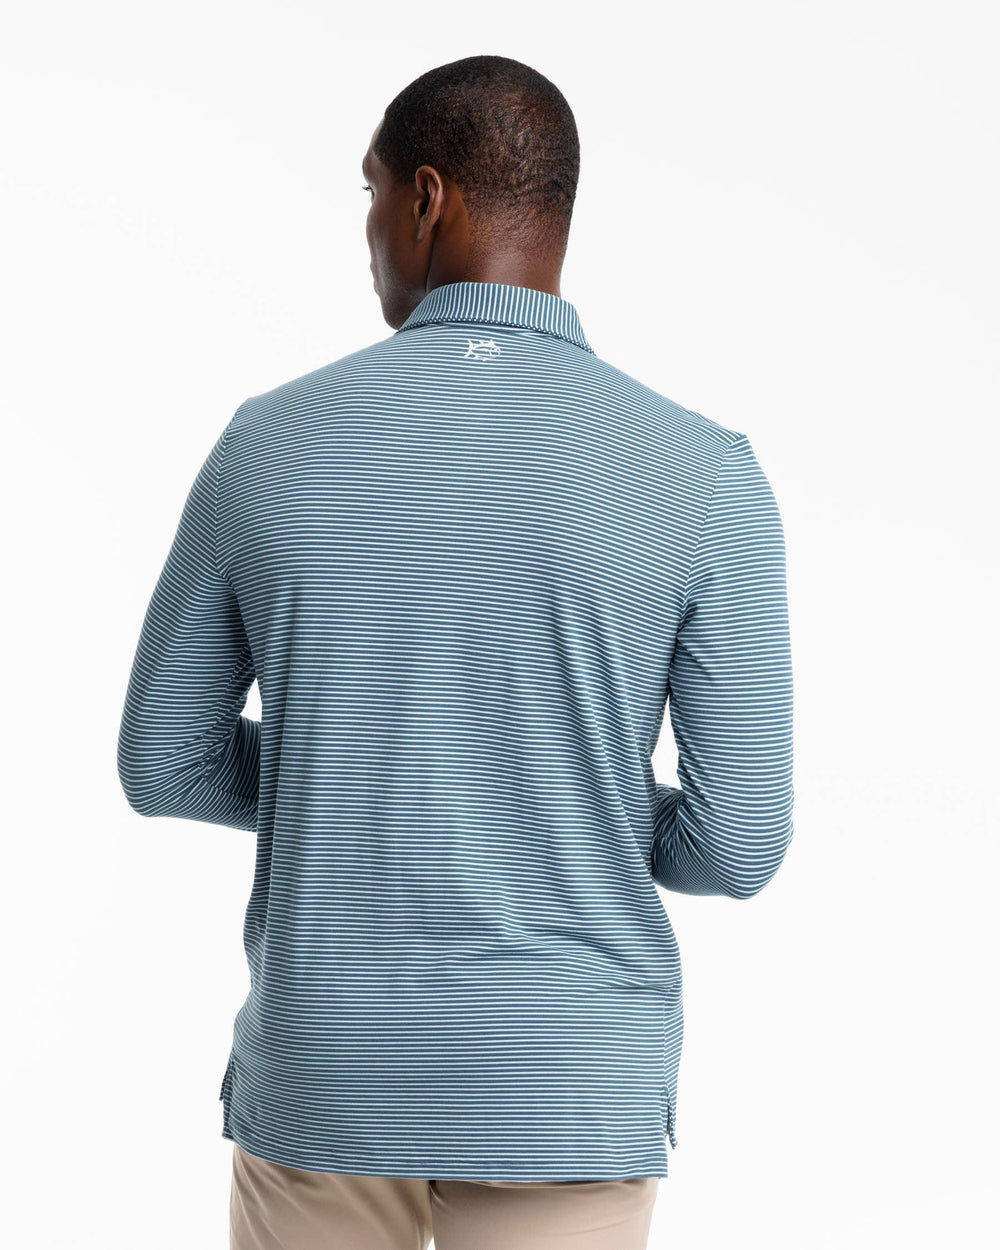 The back view of the Ryder Heather Montefuma Performance Long Sleeve Polo Shirt by Southern Tide - Heather Insignia Blue